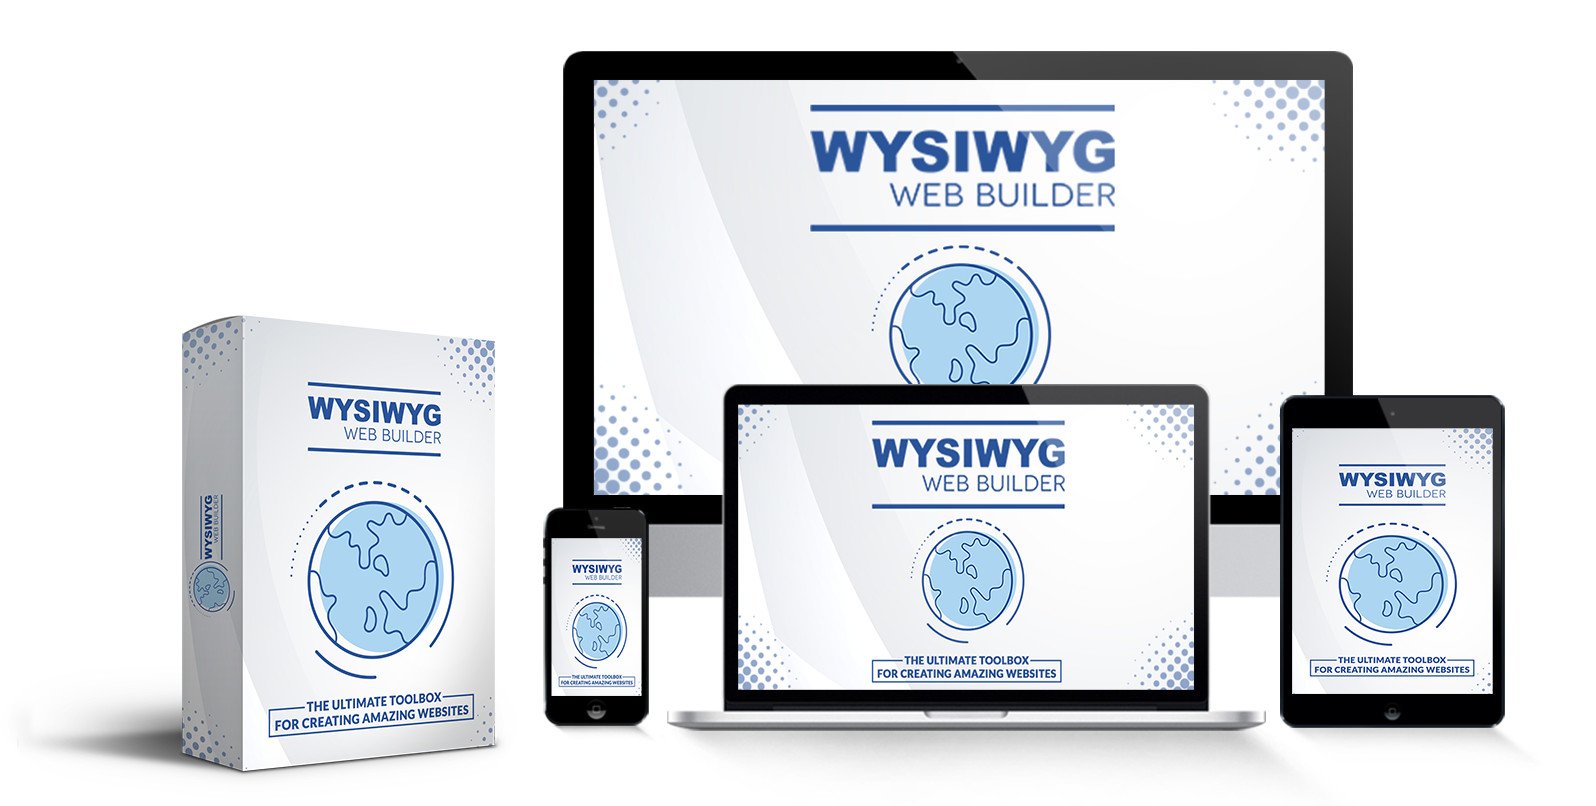 download the last version for android WYSIWYG Web Builder 18.3.0